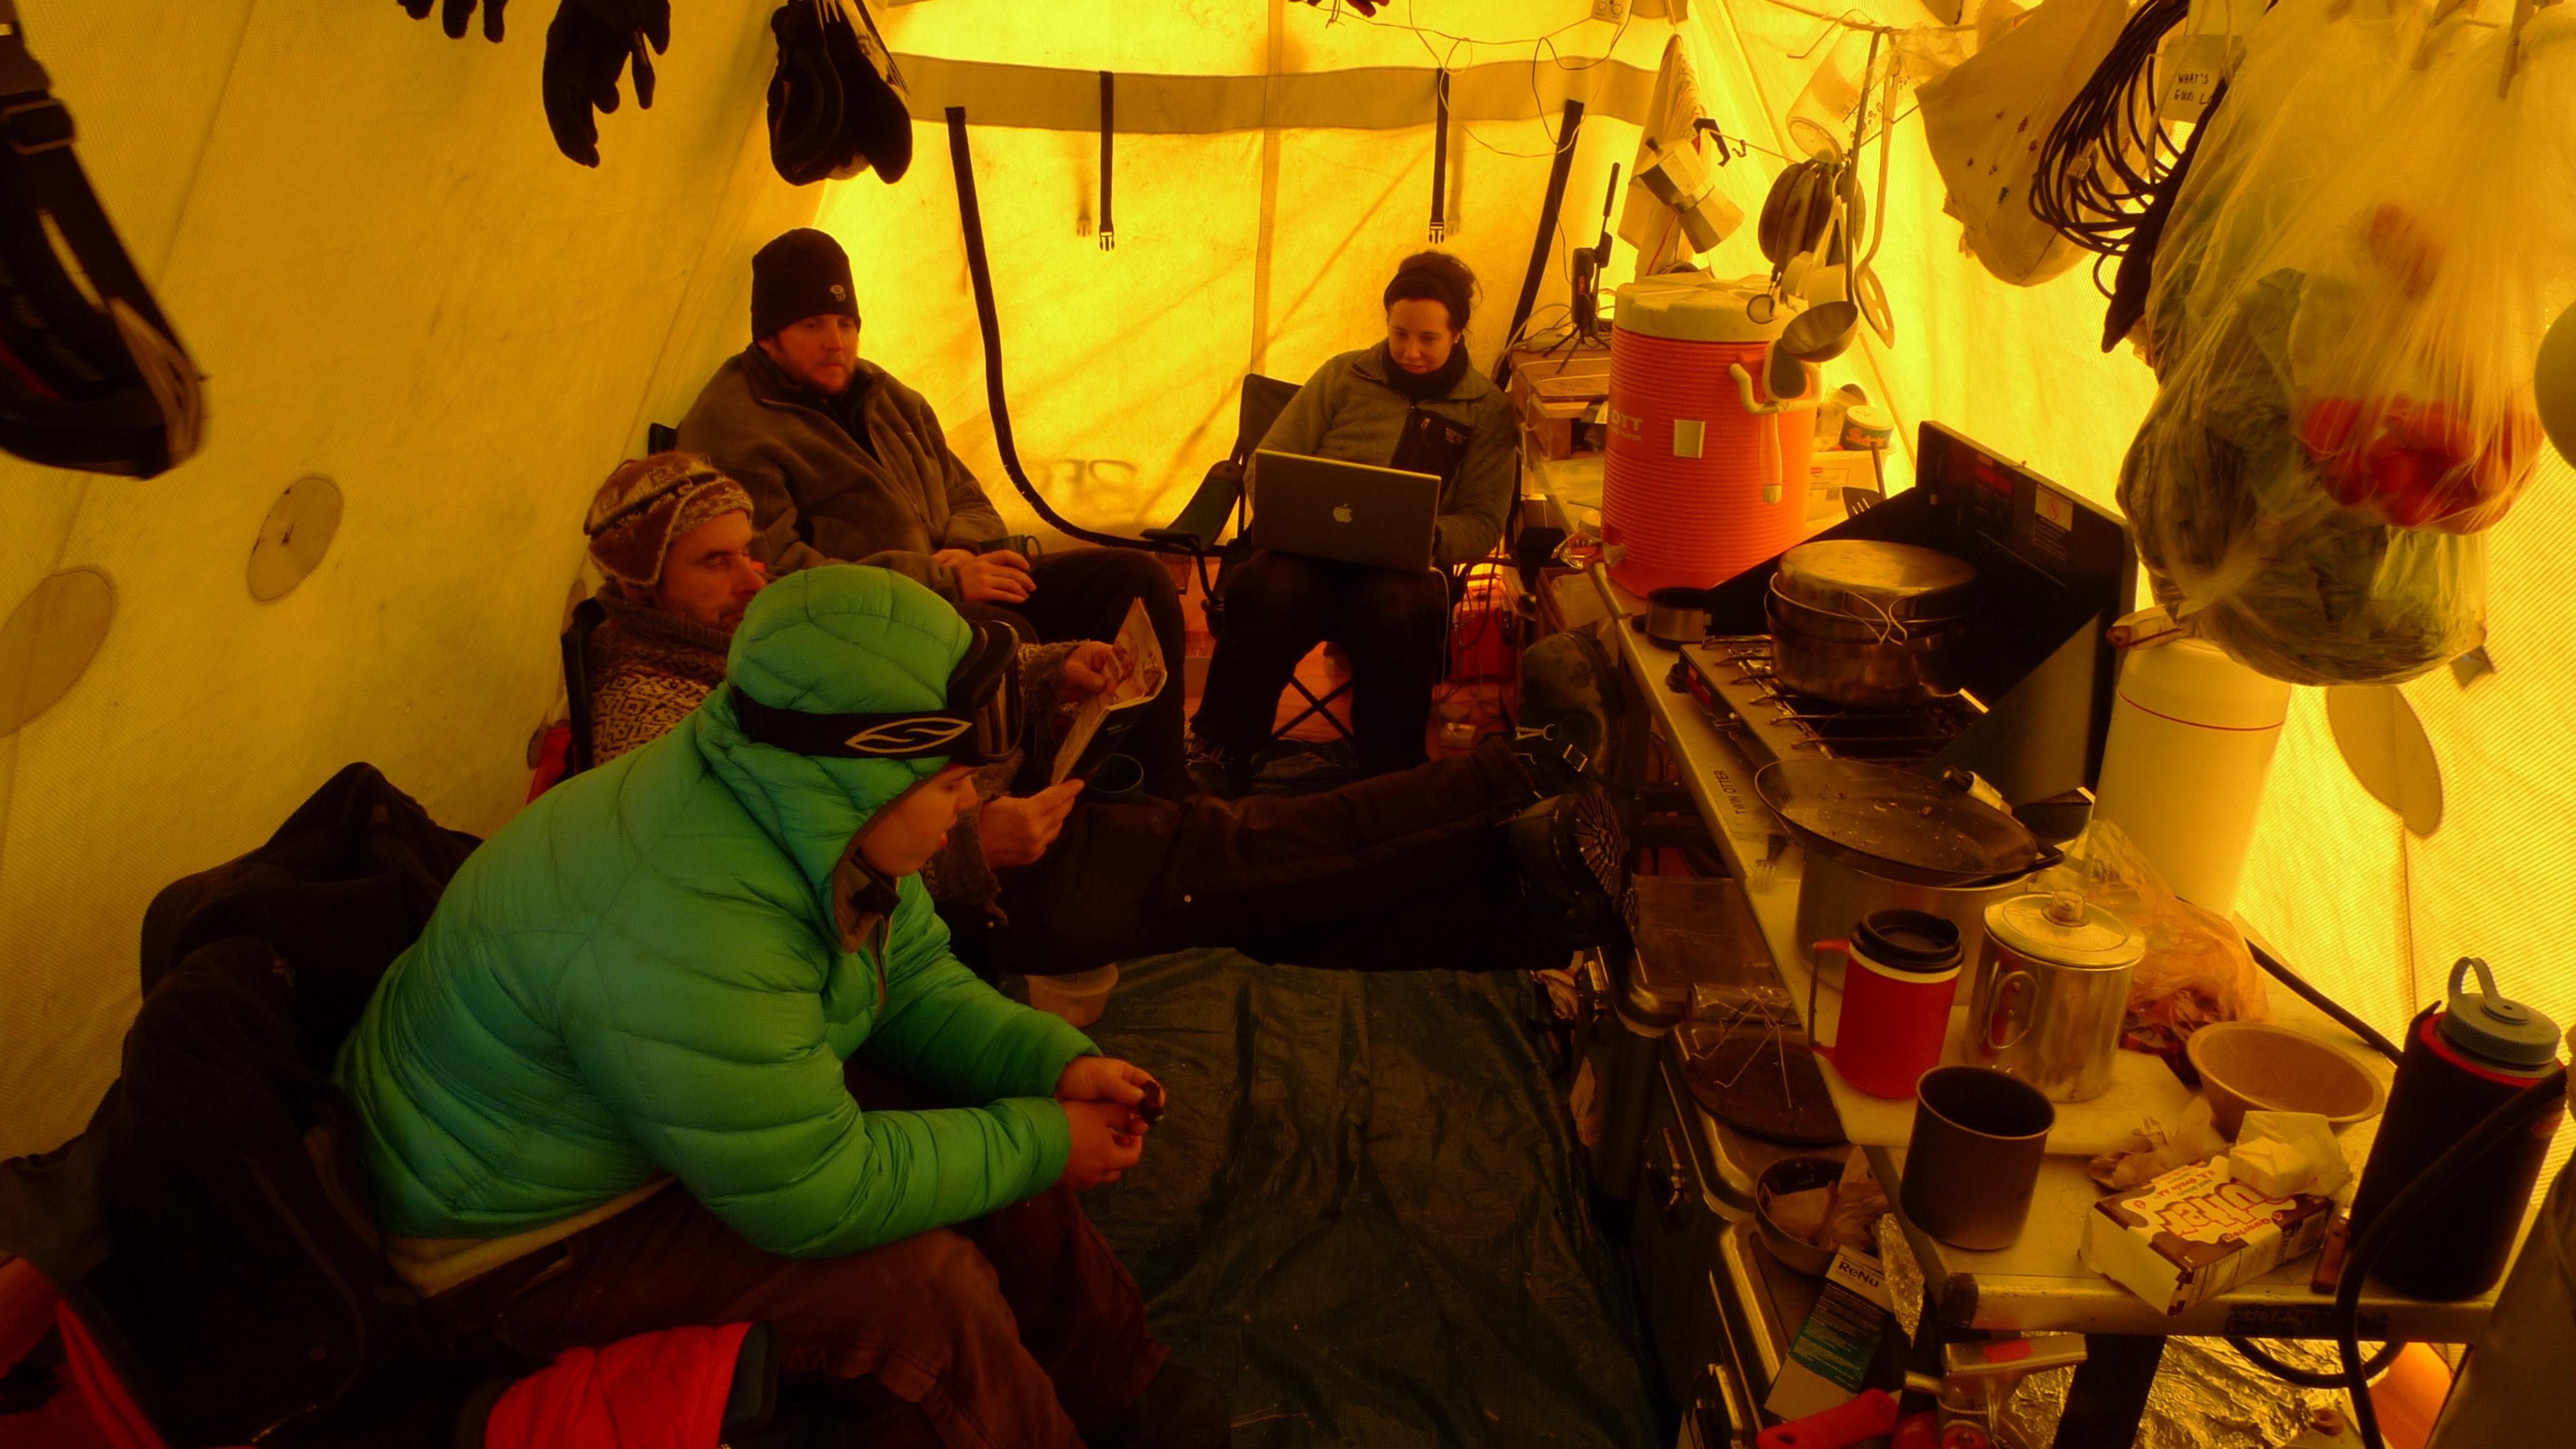 Nicole Spaulding, Mike Waszkiewicz, John Higgins and Melissa Rohde relax in the kitchen tent at the end of a hard day's work